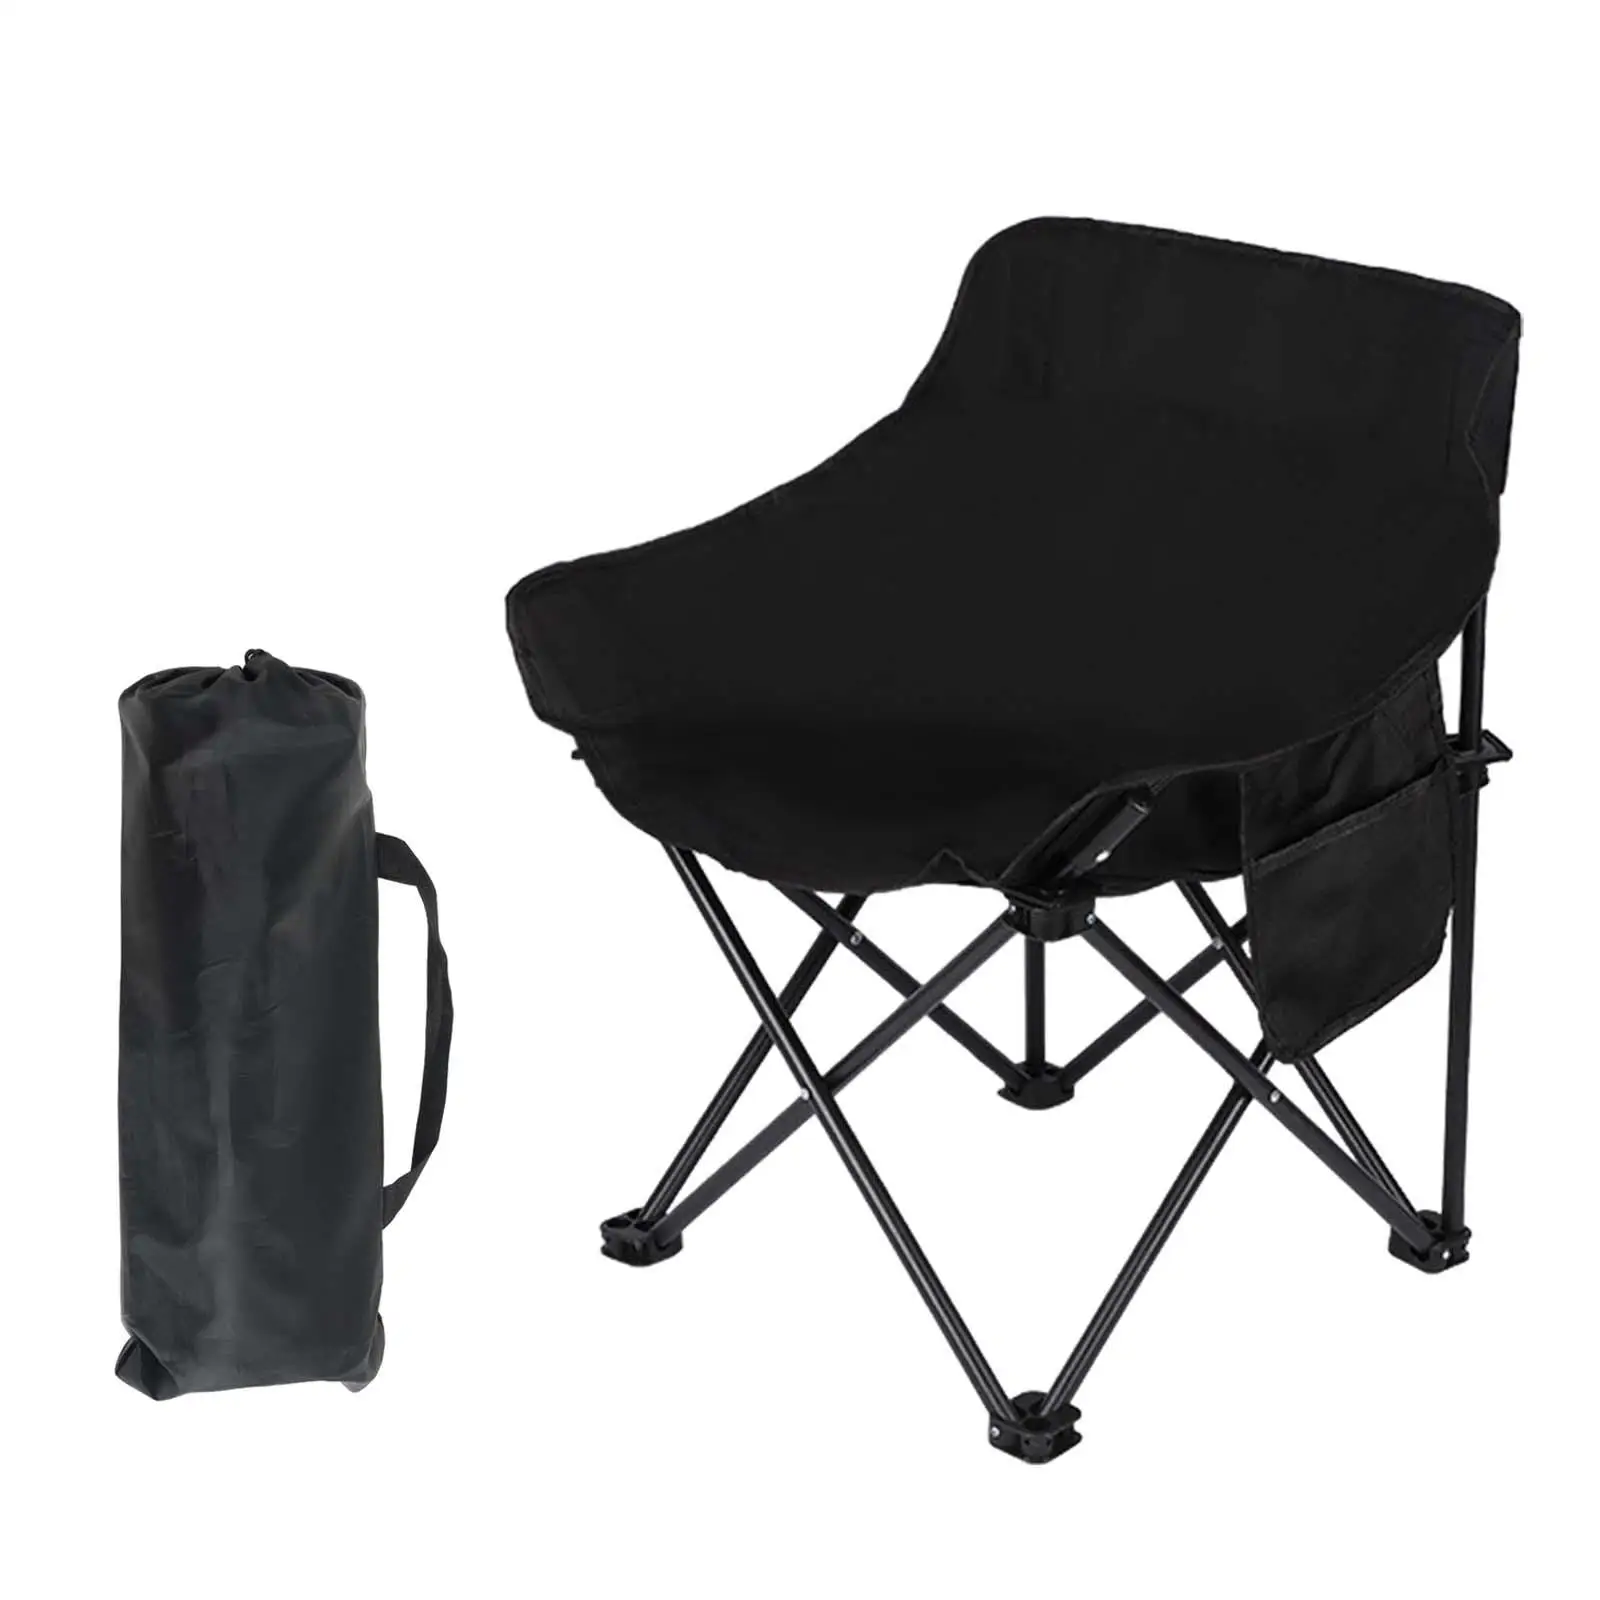 Folding Camping Chair Portable Folding Chair Collapsible Anti Slip Beach Chair Outdoor Moon Chair for Picnics Barbecue Hiking